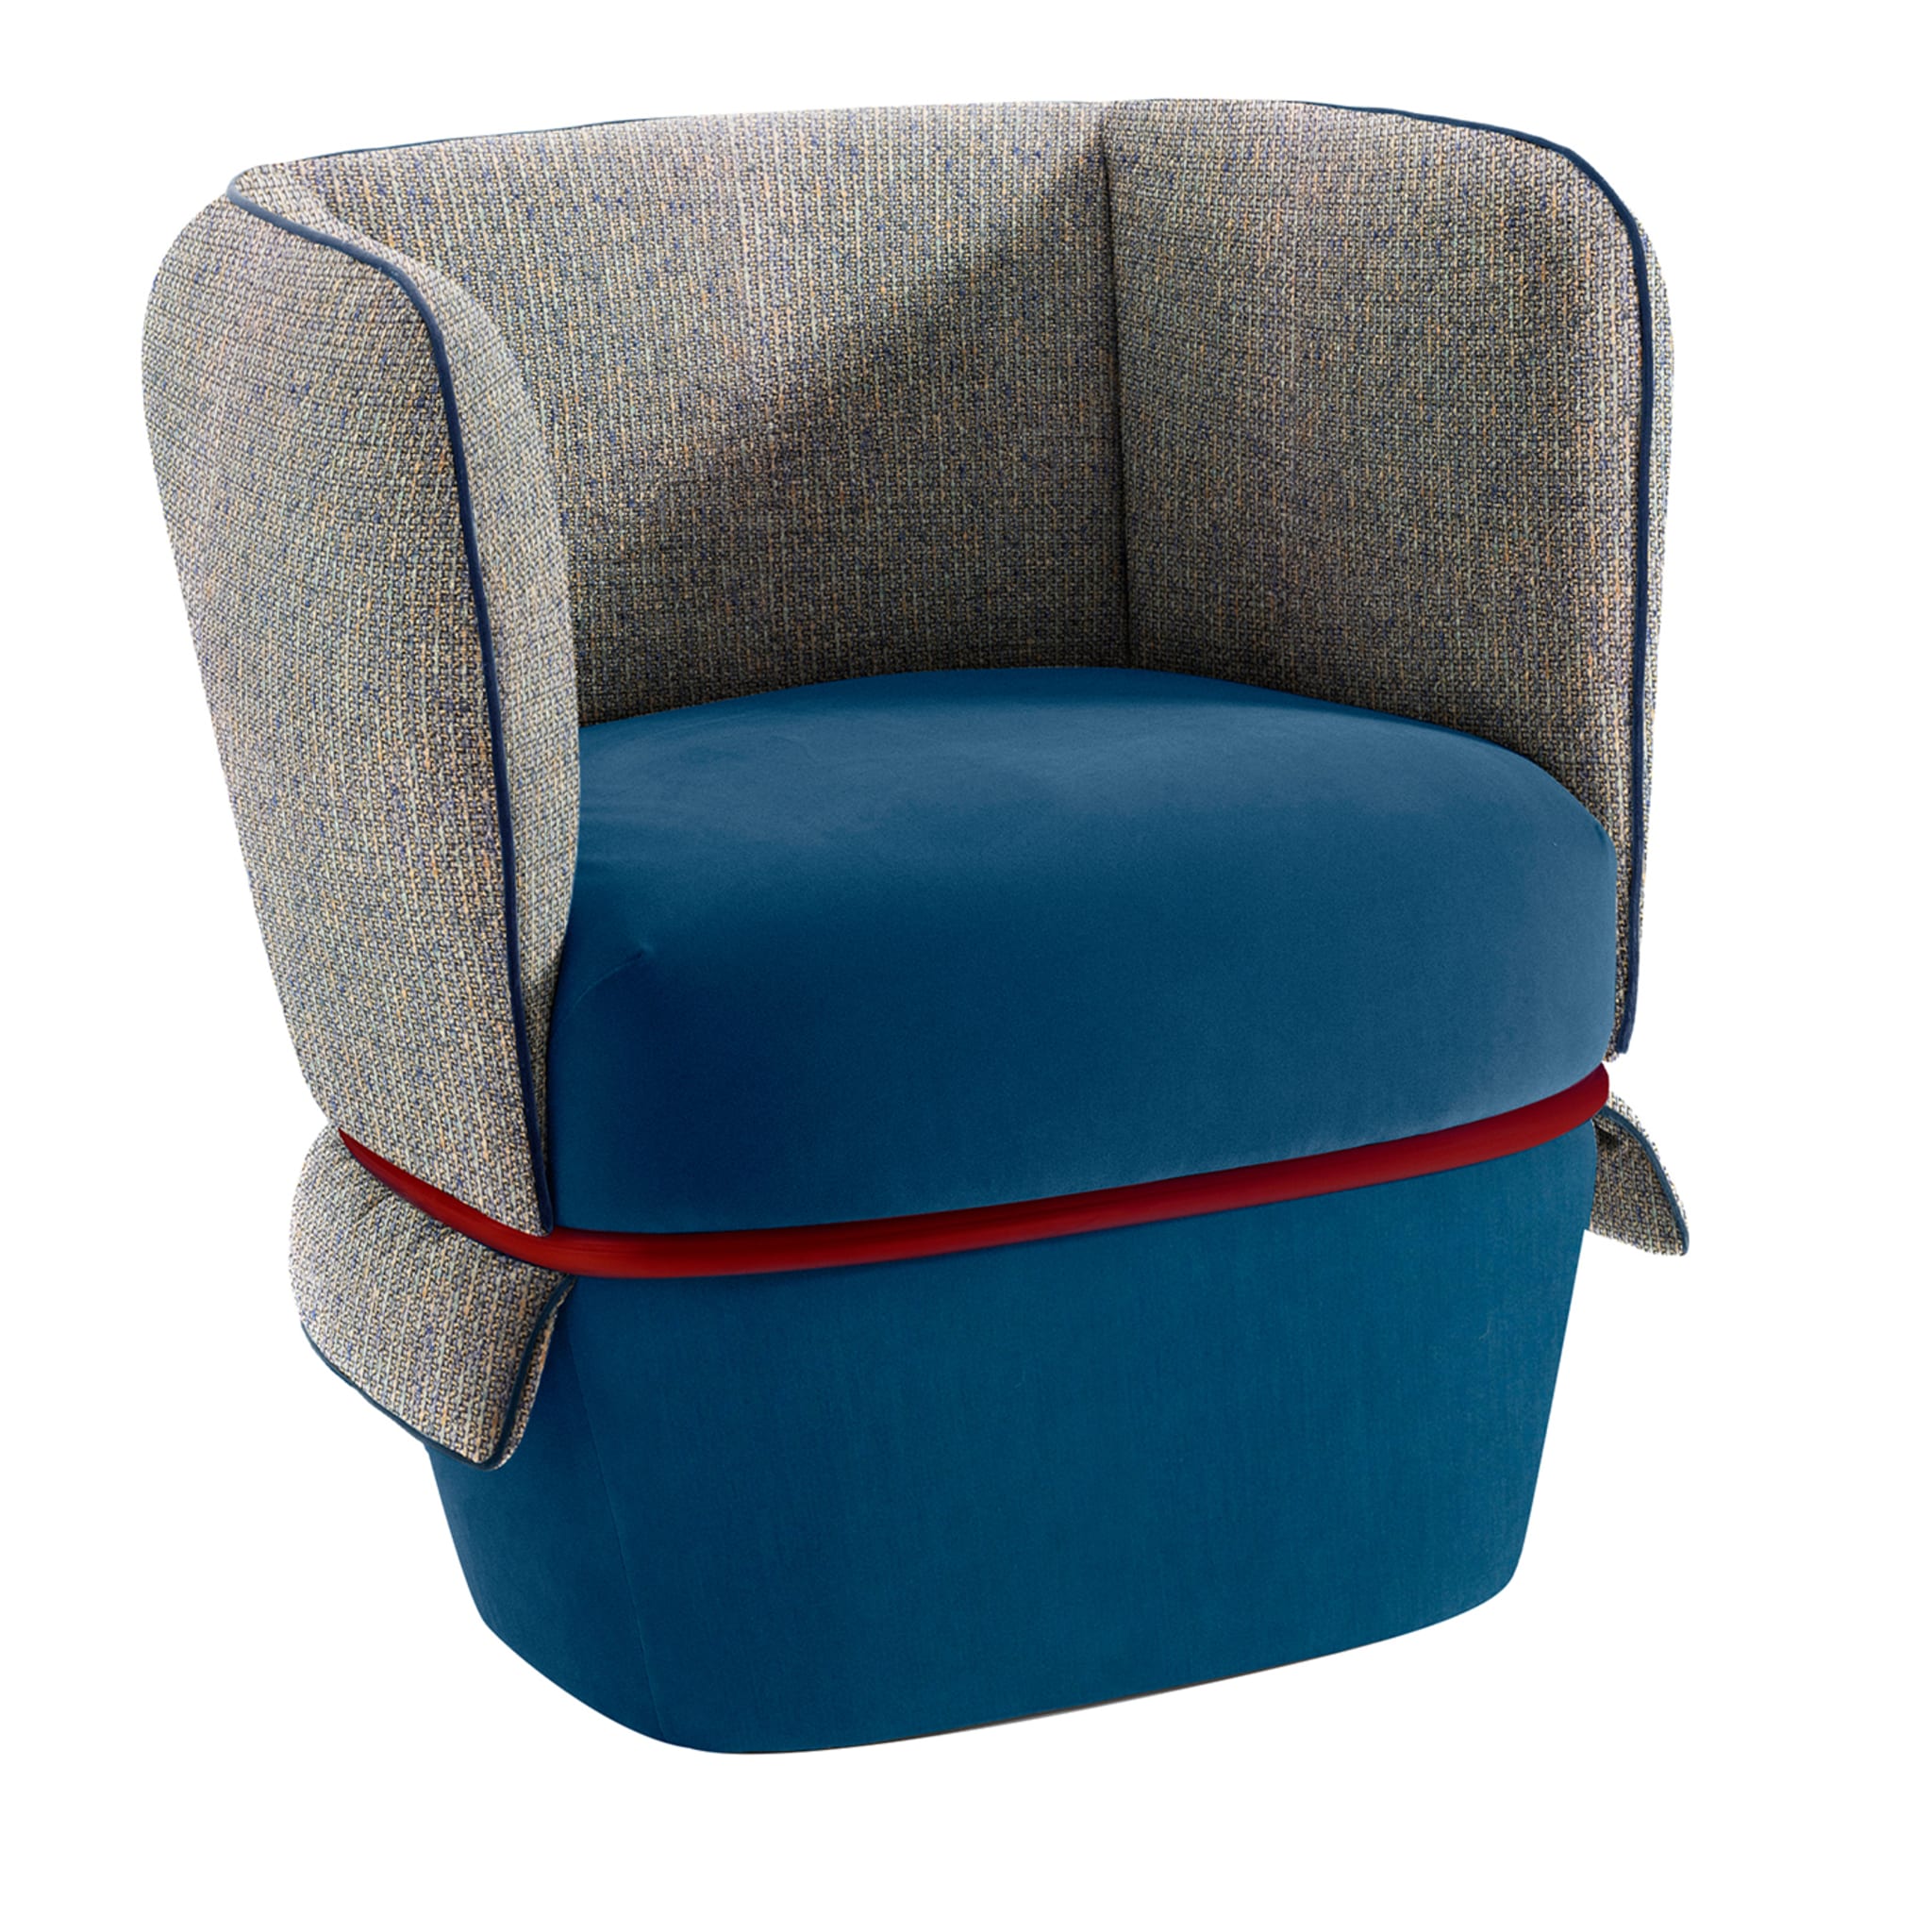 Chemise Blue and Gray Armchair by Studio LI_DO - Main view